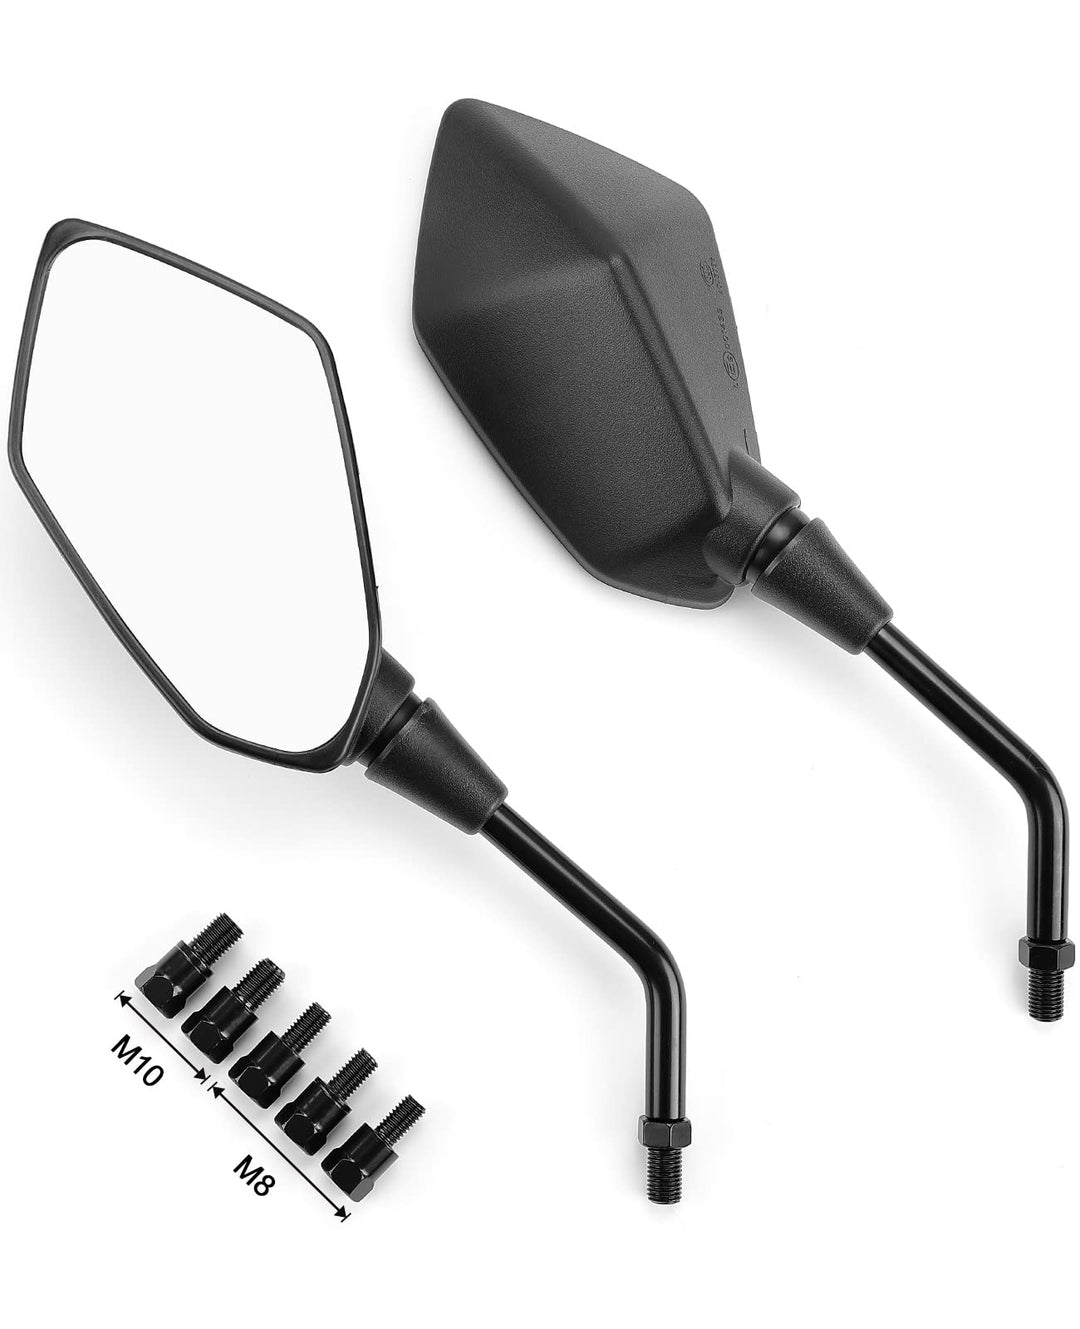 Universal Motorcycle Rear View Mirrors with M8 M10 Bolt - Kemimoto